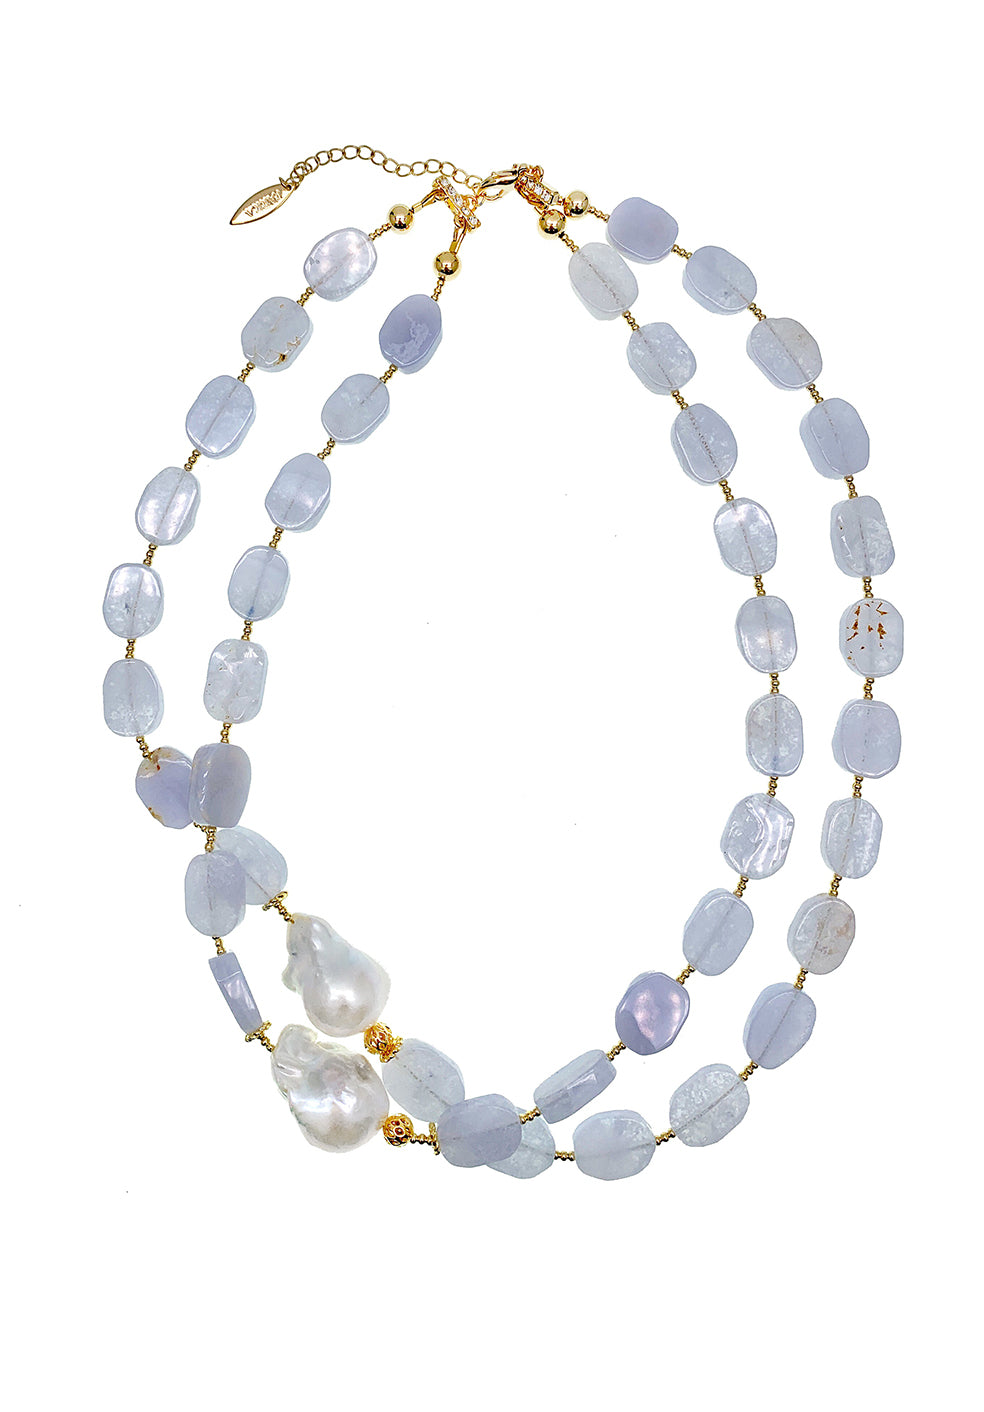 Blue Lace Agate With Baroque Pearls Double Strands Necklace GN023 - FARRA